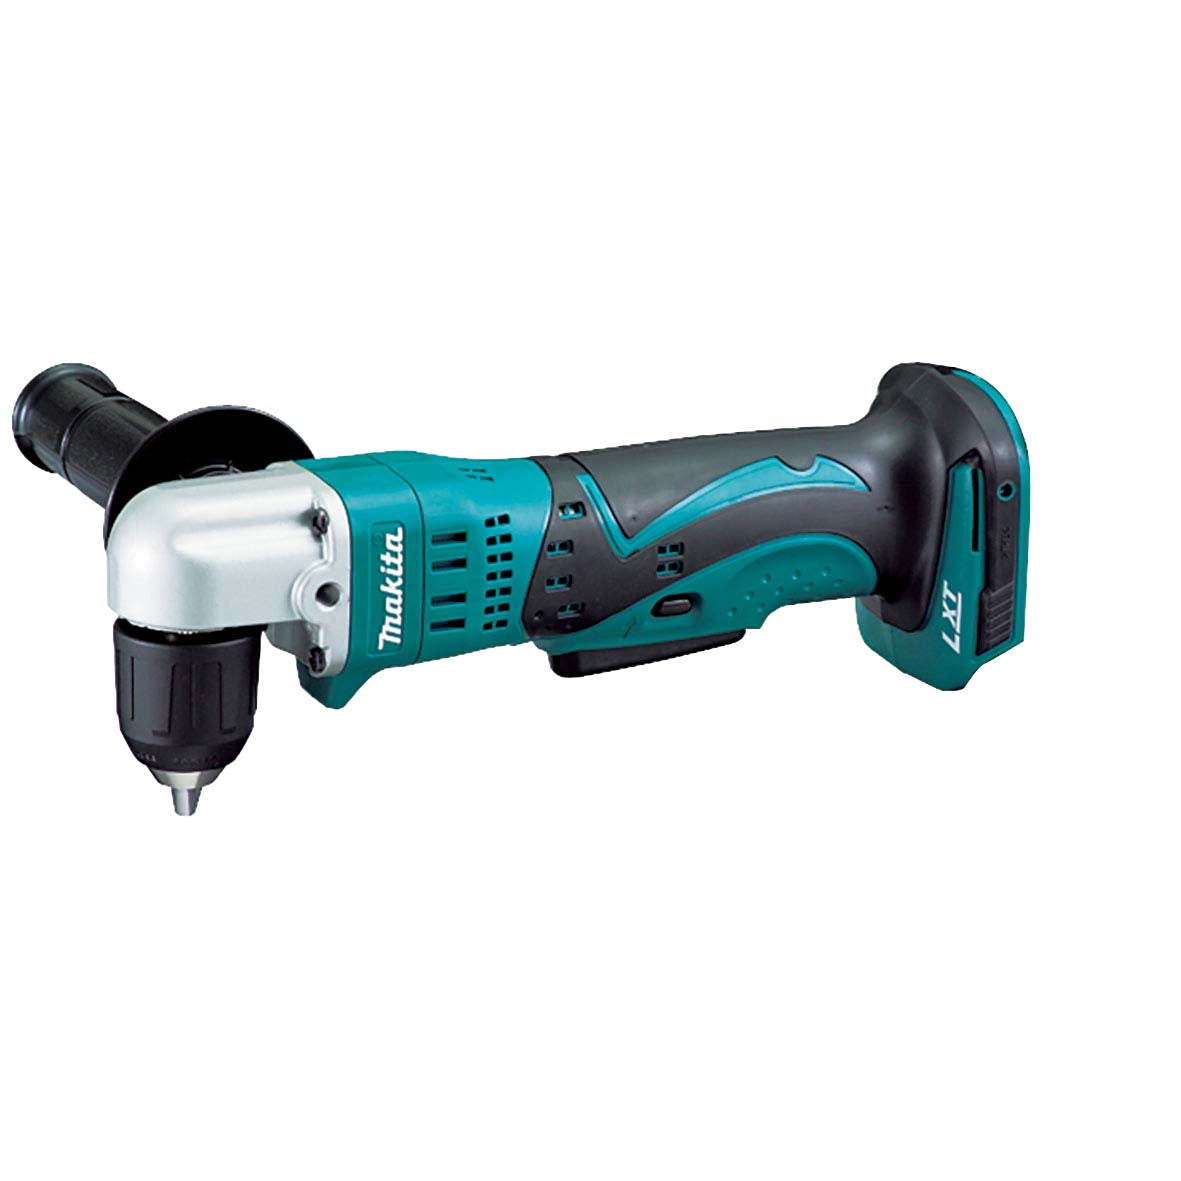 18V Mobile Angle Drill Bare (Tool Only) DDA351Z by Makita